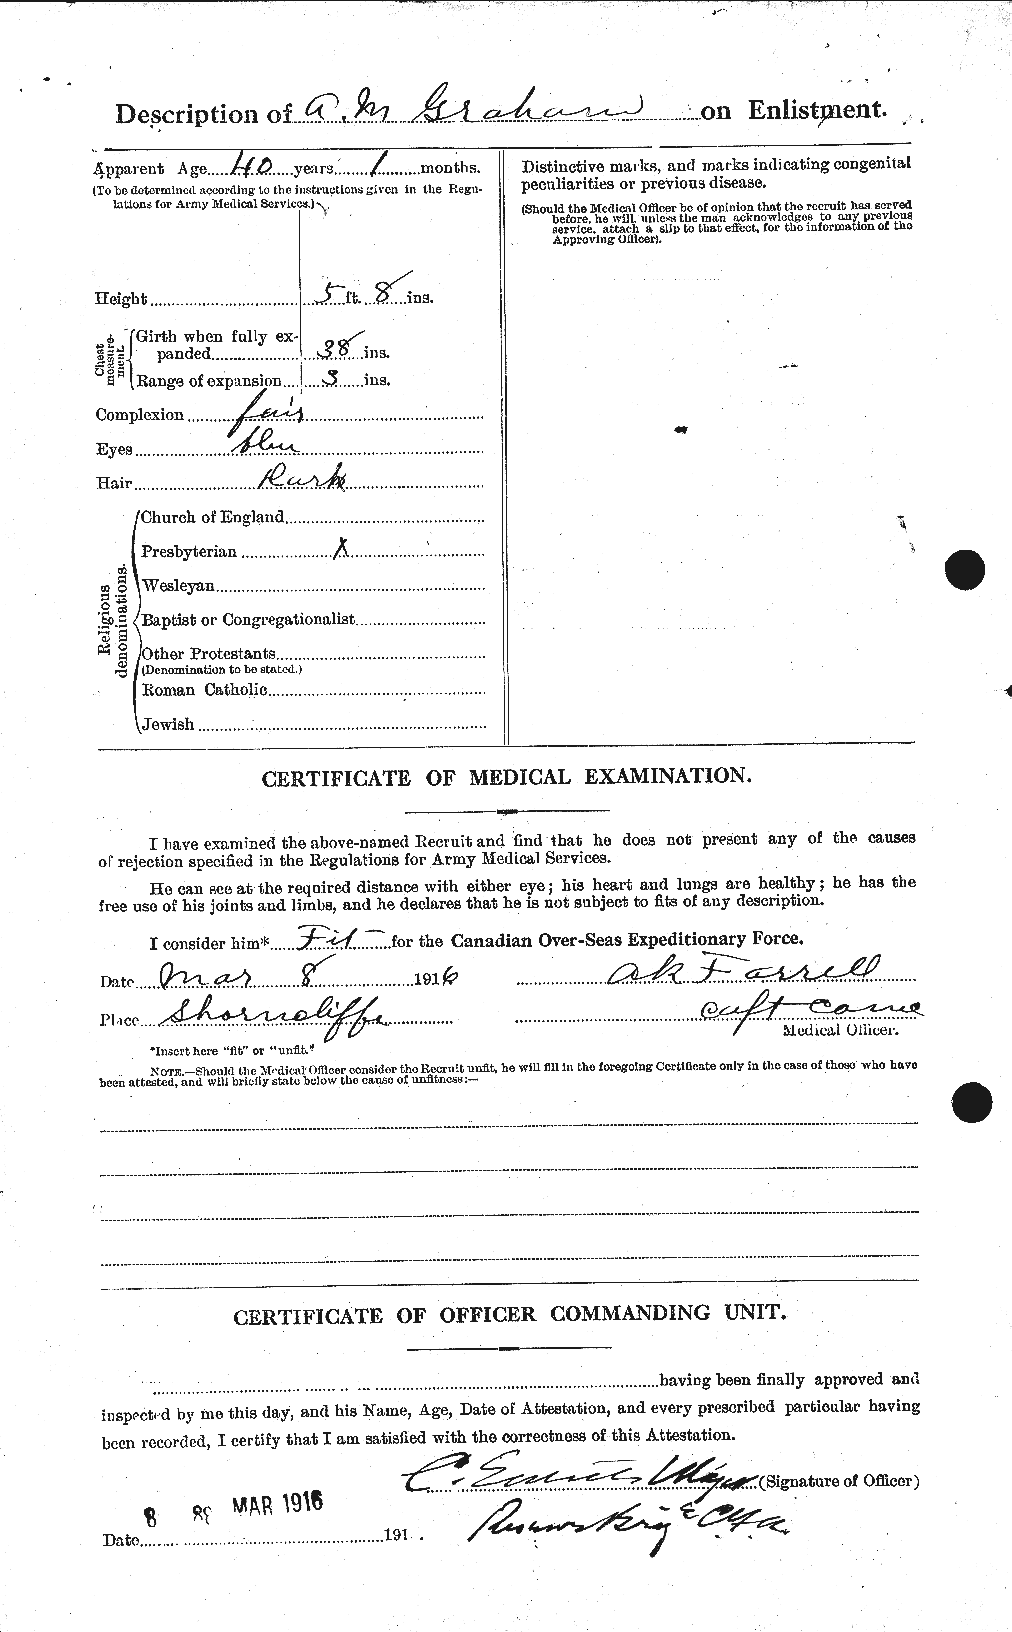 Personnel Records of the First World War - CEF 359640b